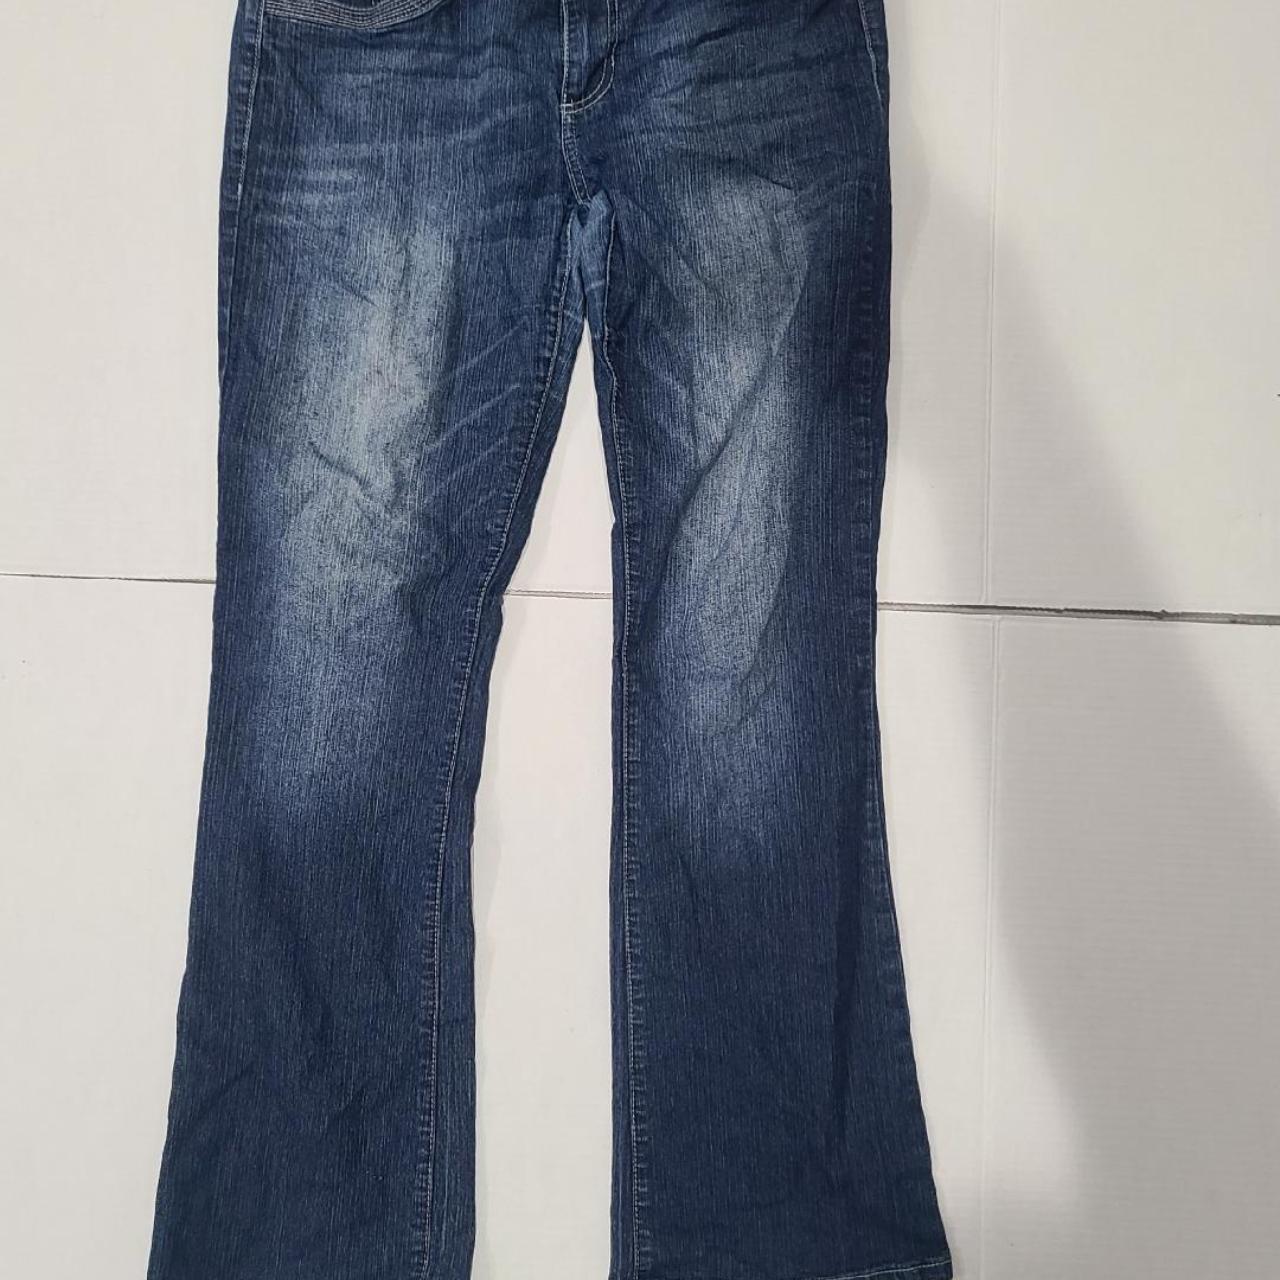 Phat Fashions Silver Label Jeans size 9. Good... - Depop